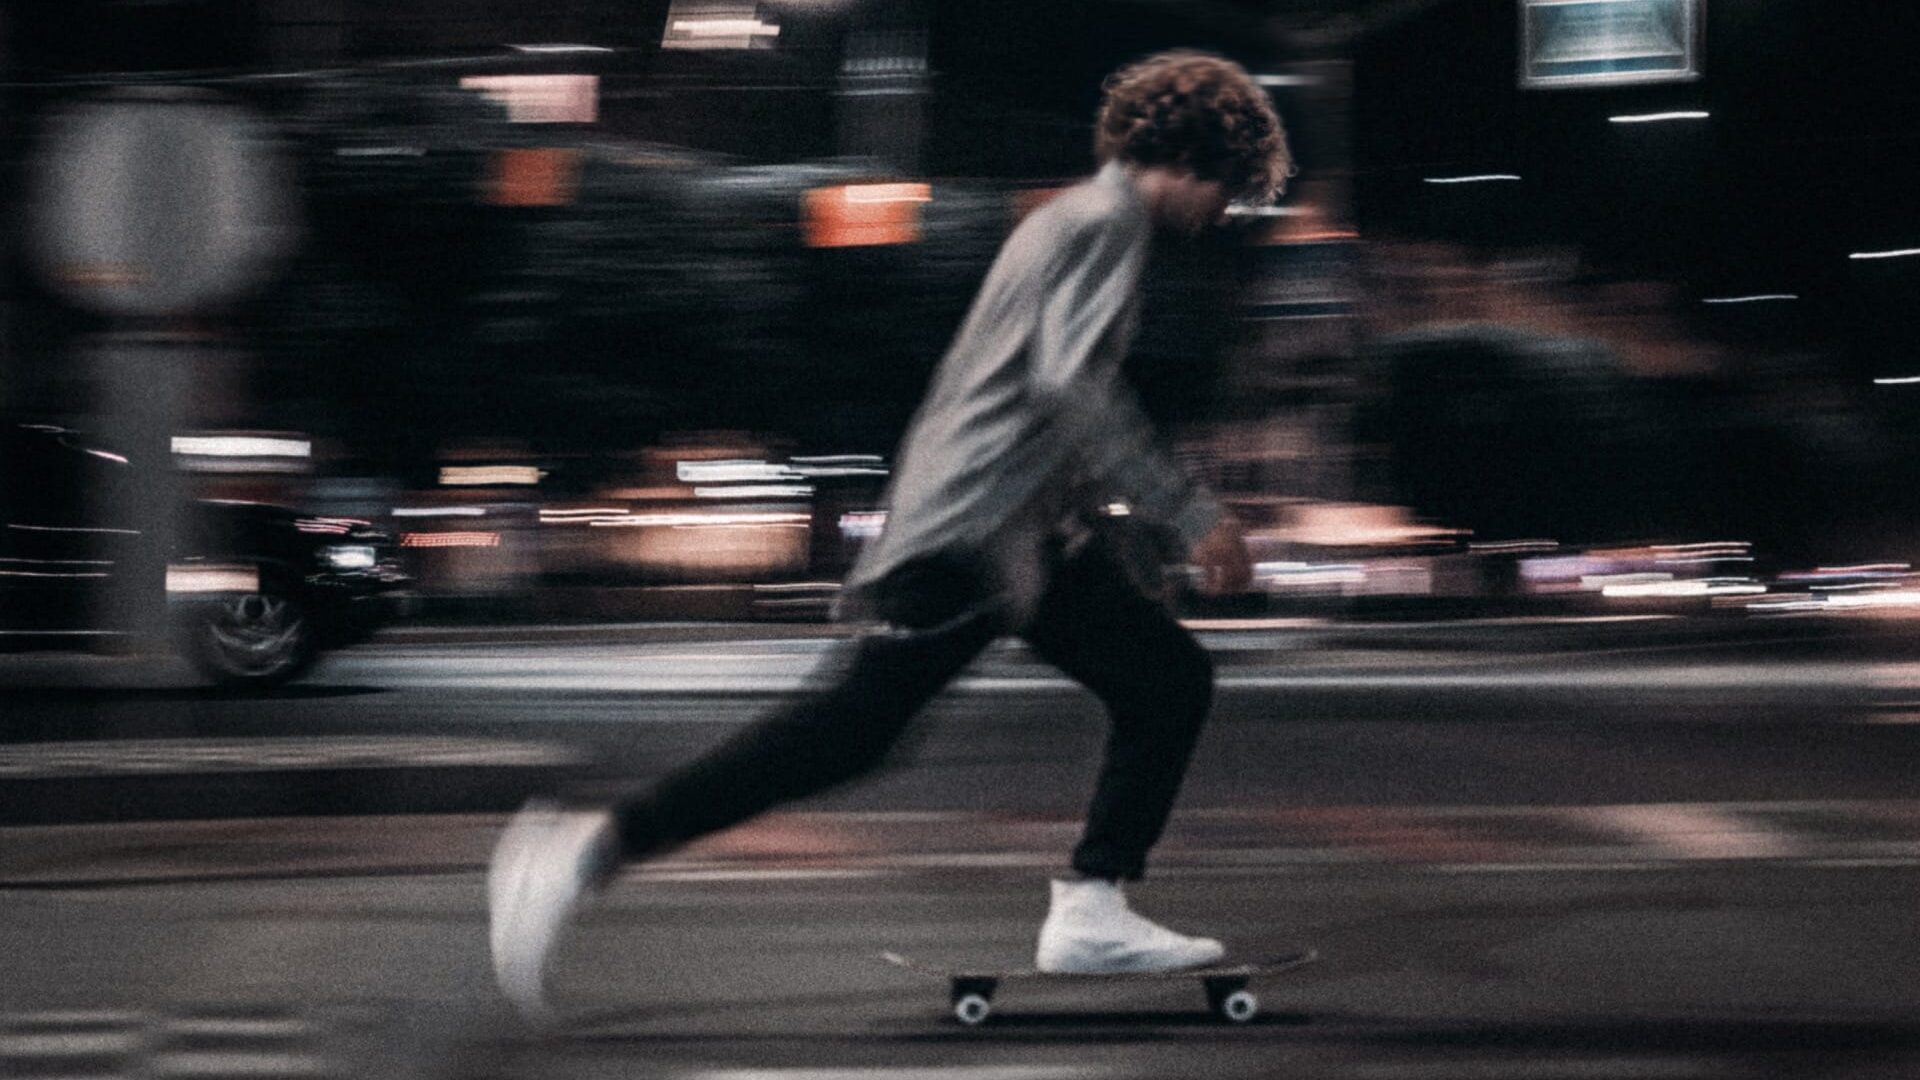 All About Skateboarding at Night